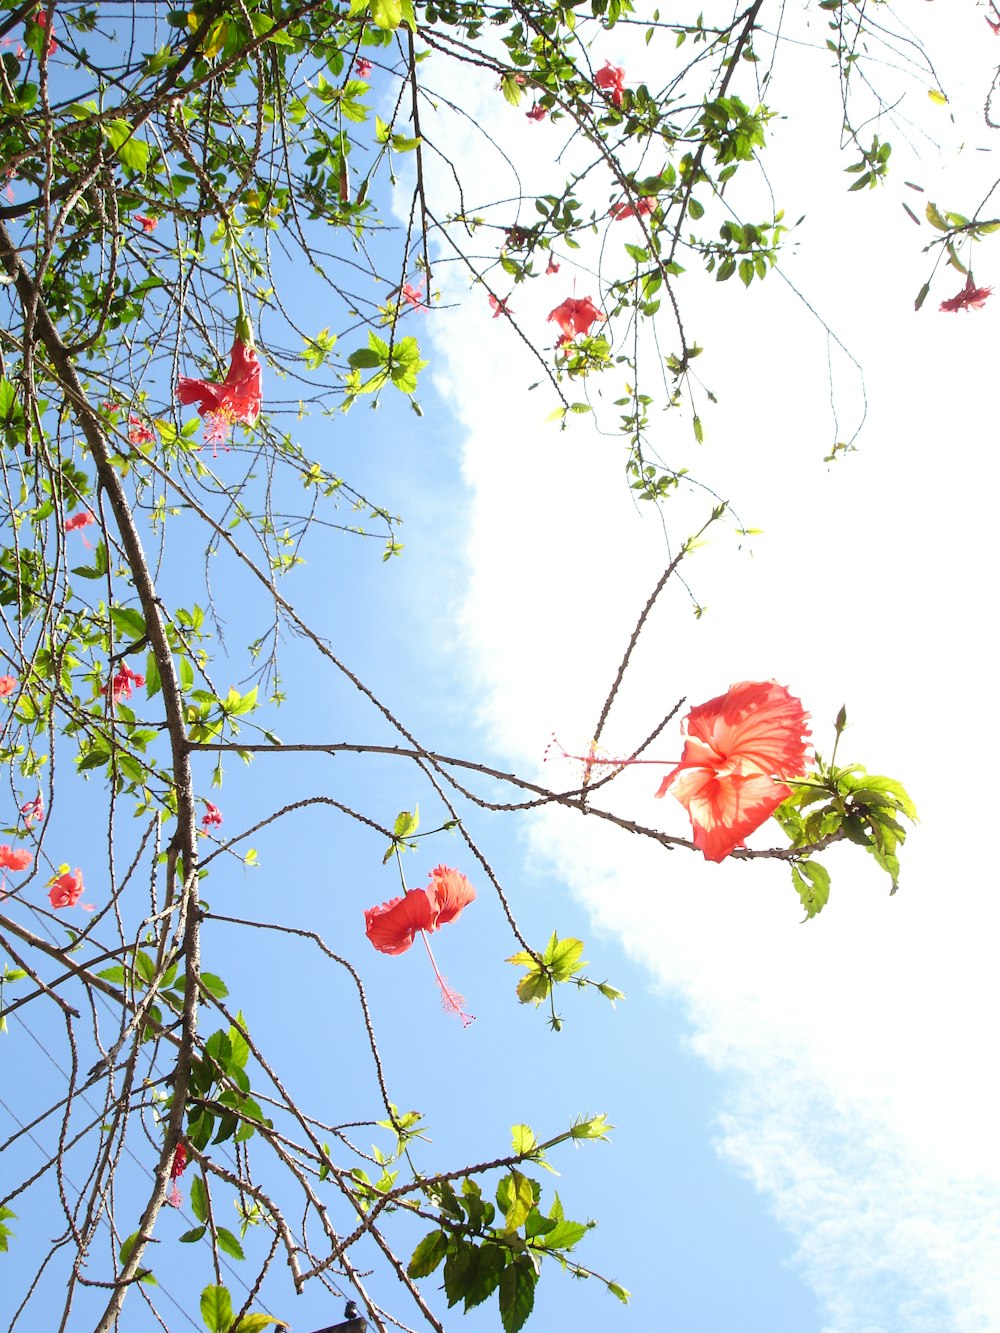 red flower on tree branch during daytime